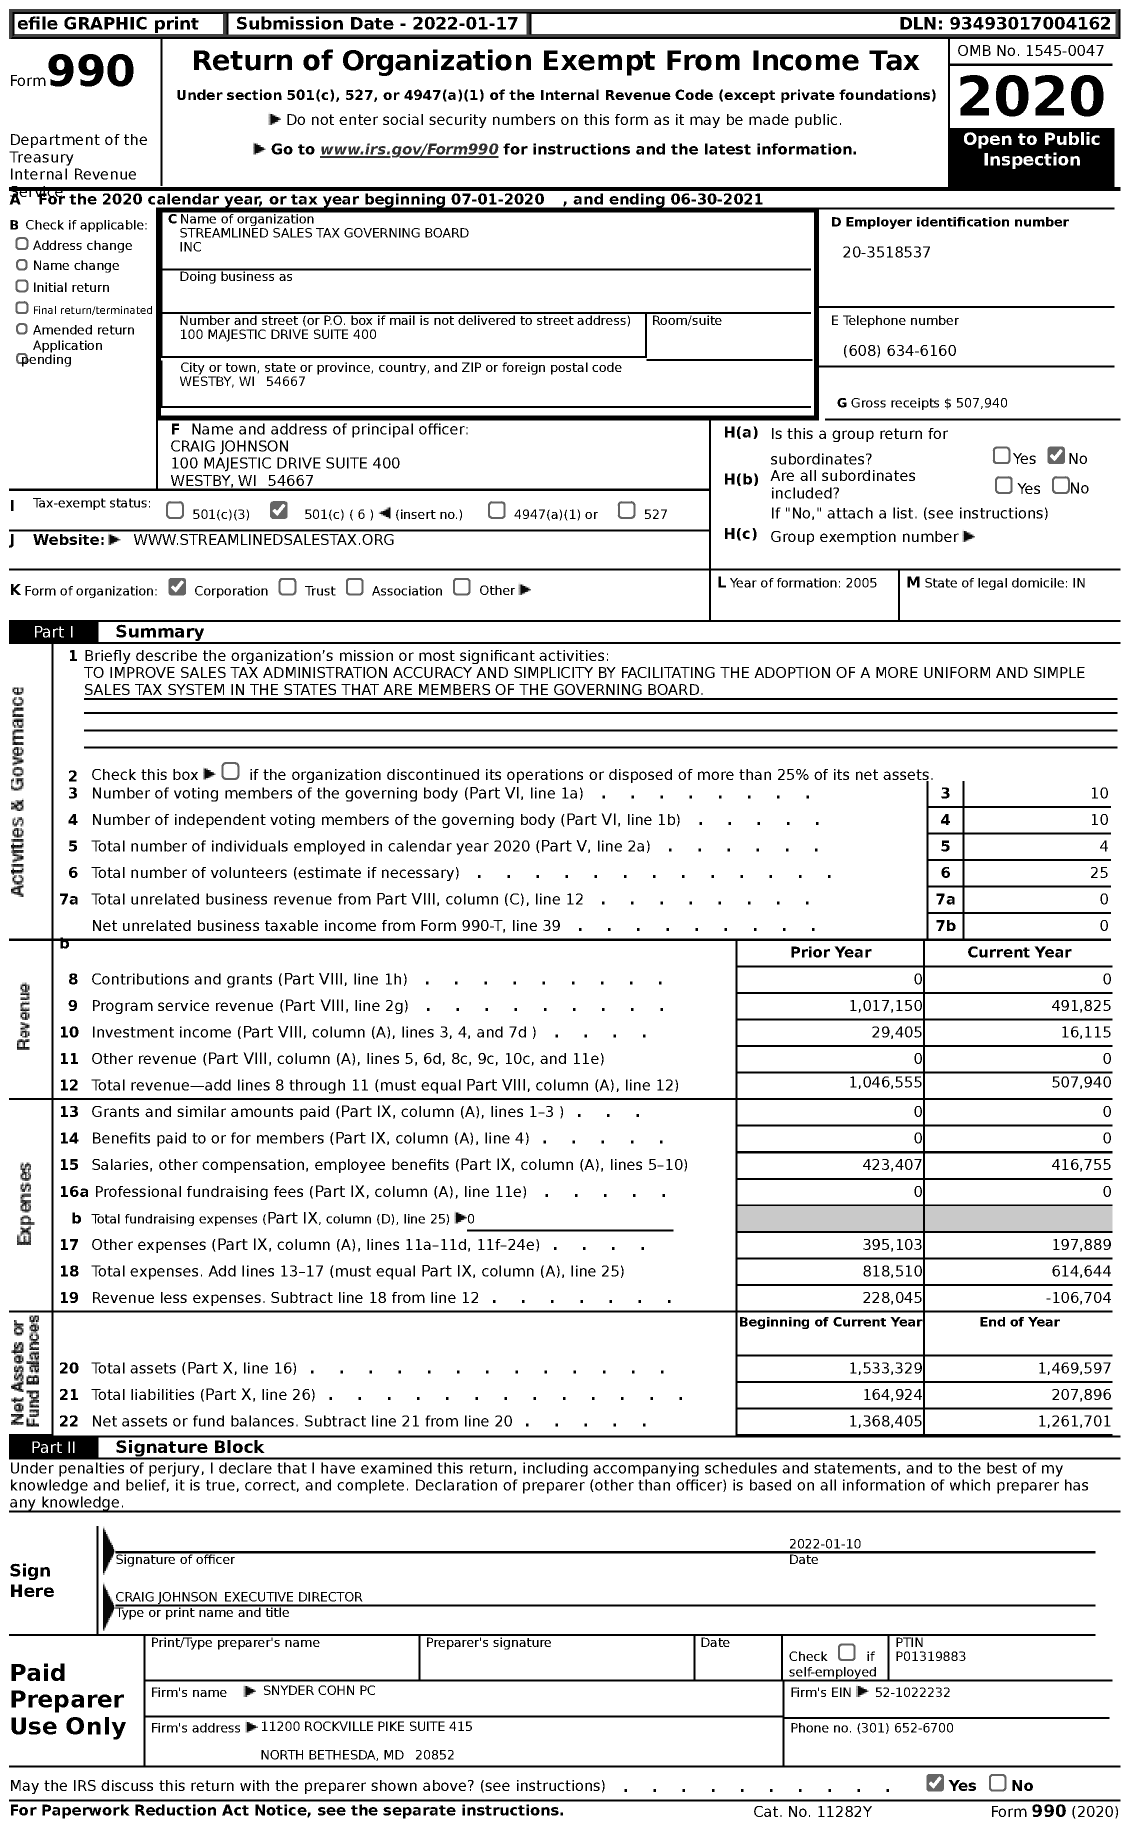 Image of first page of 2020 Form 990 for Streamlined Sales Tax Governing Board